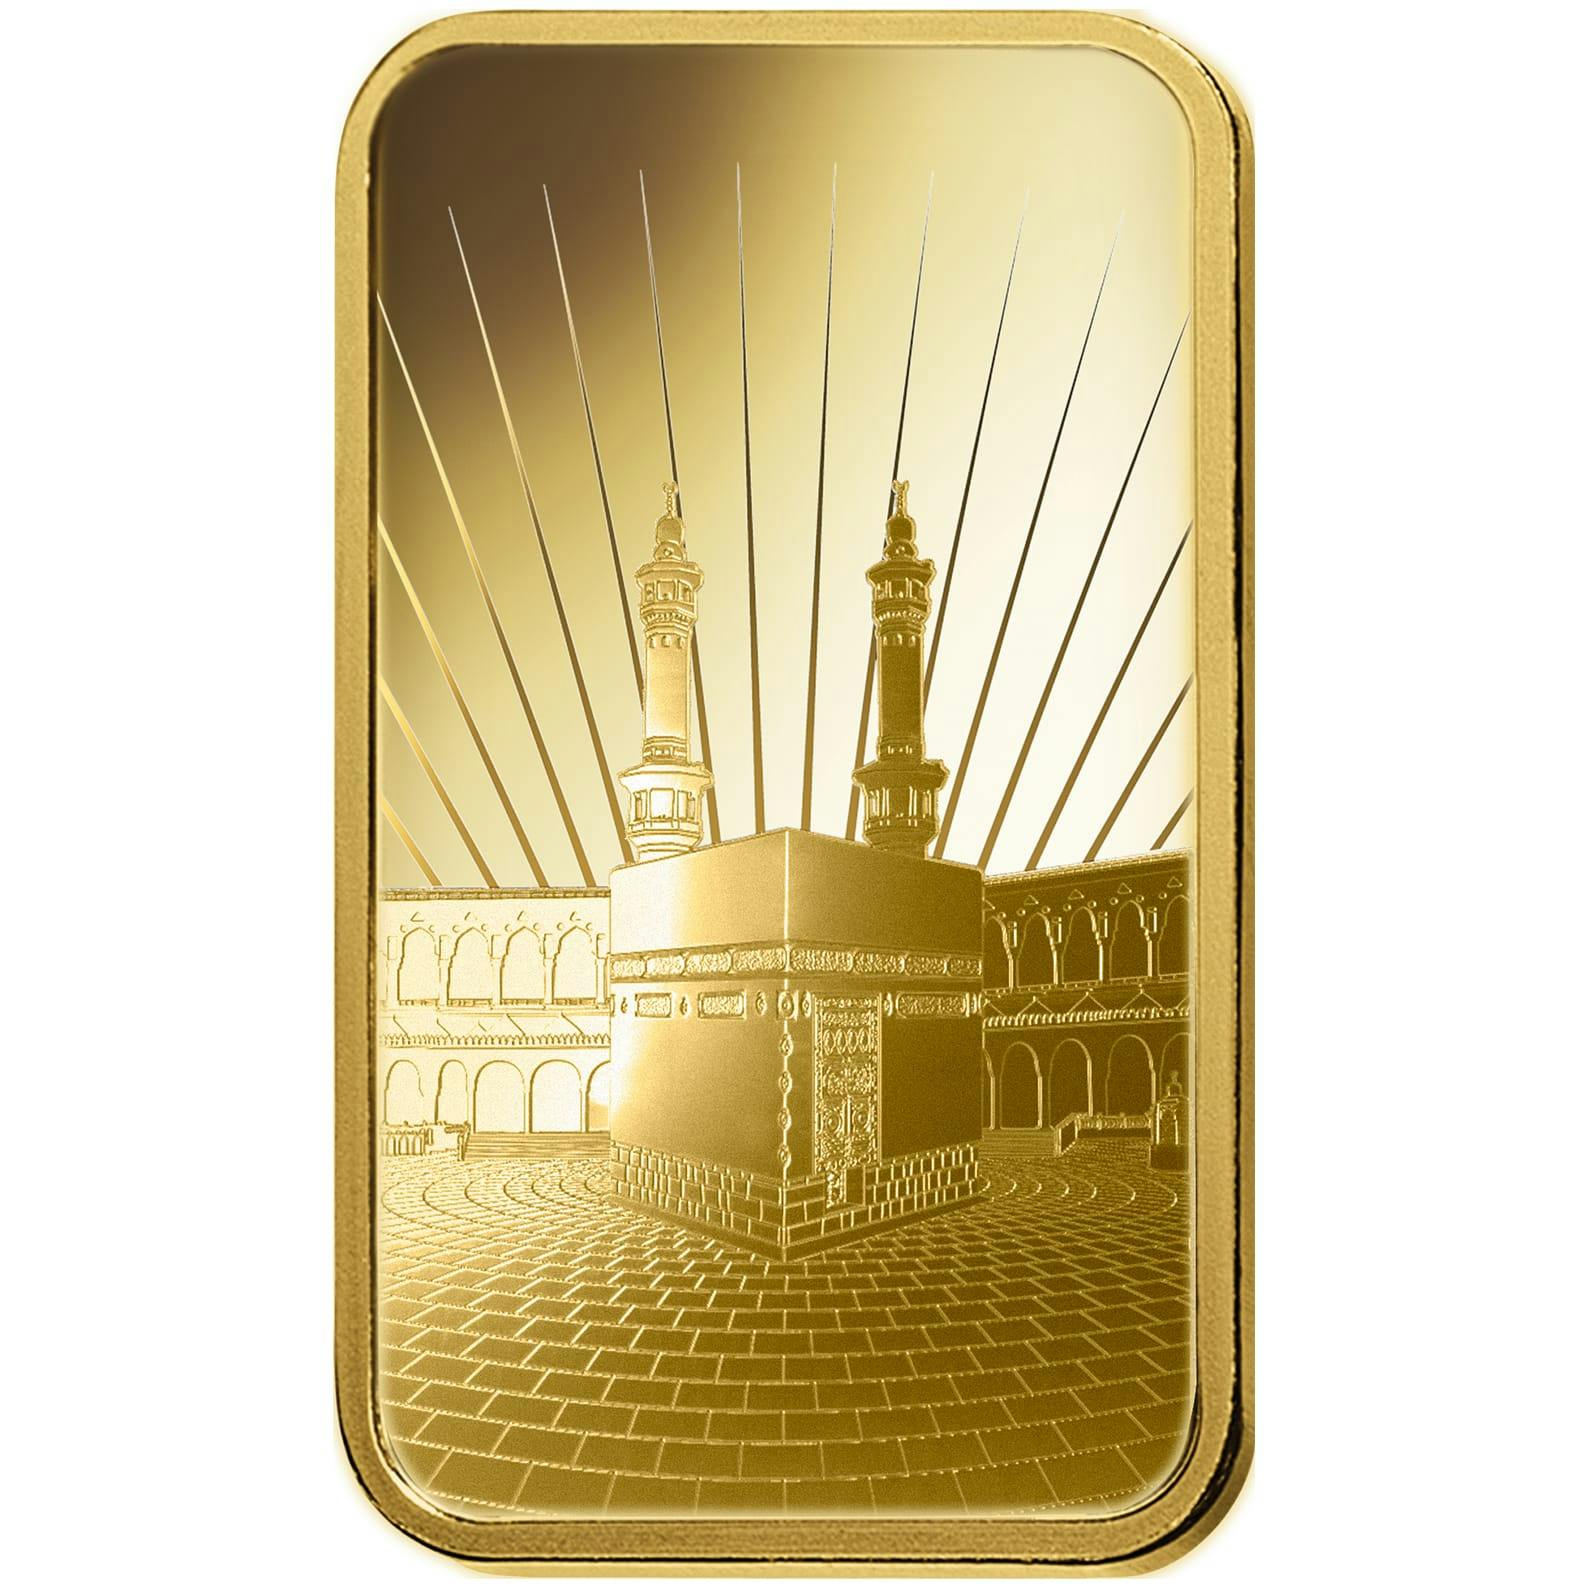 Achat d'or, 5 gram d'or pur Ka'Bah Mecca - PAMP Suisse - Front 